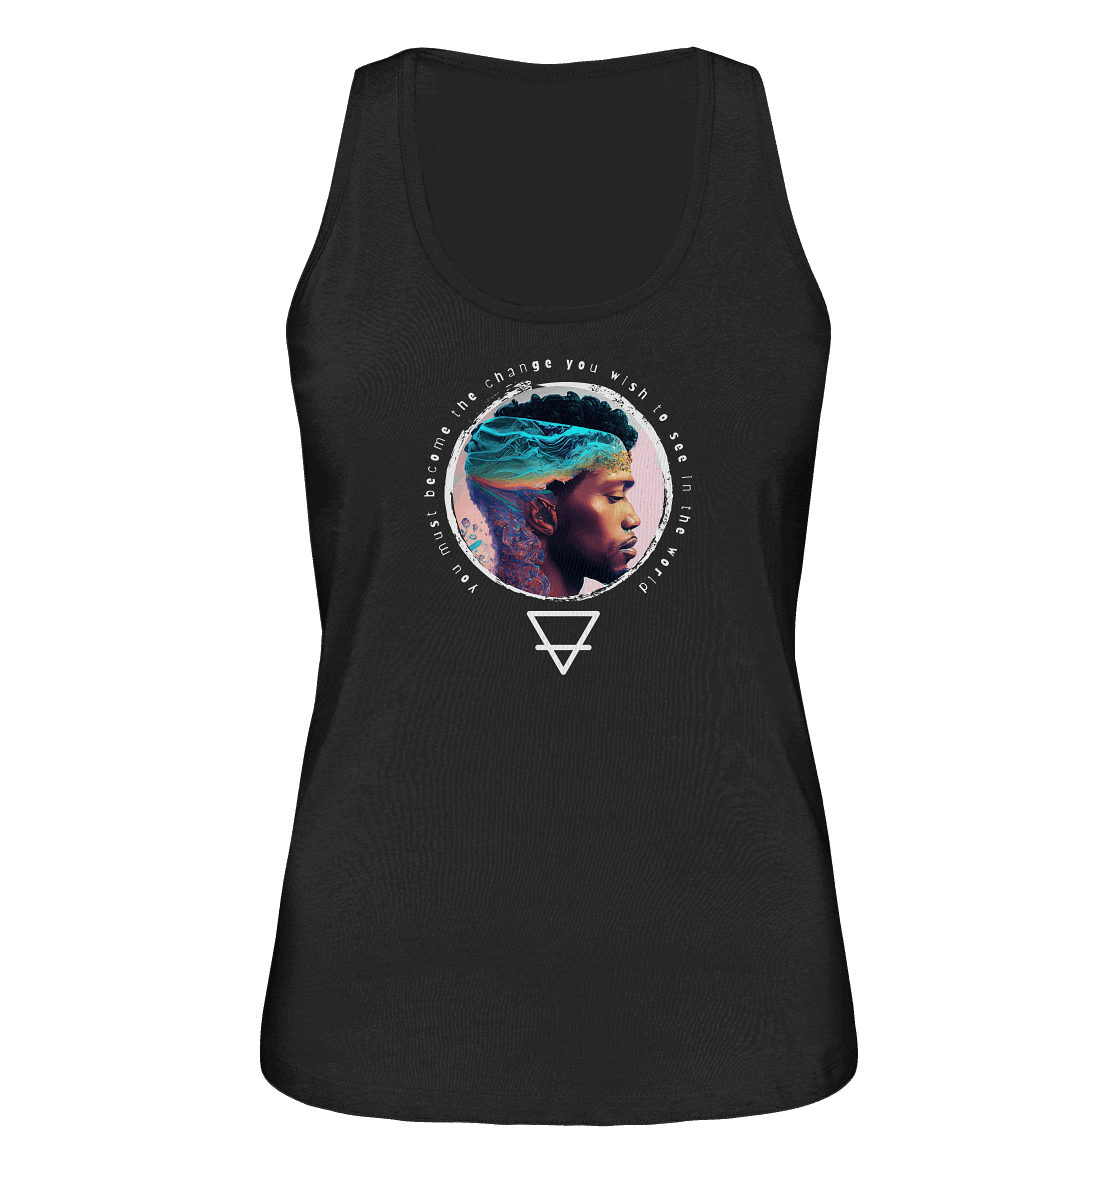 Nature - You must become the change you wish to see in the world - Ladies Organic Tank-Top